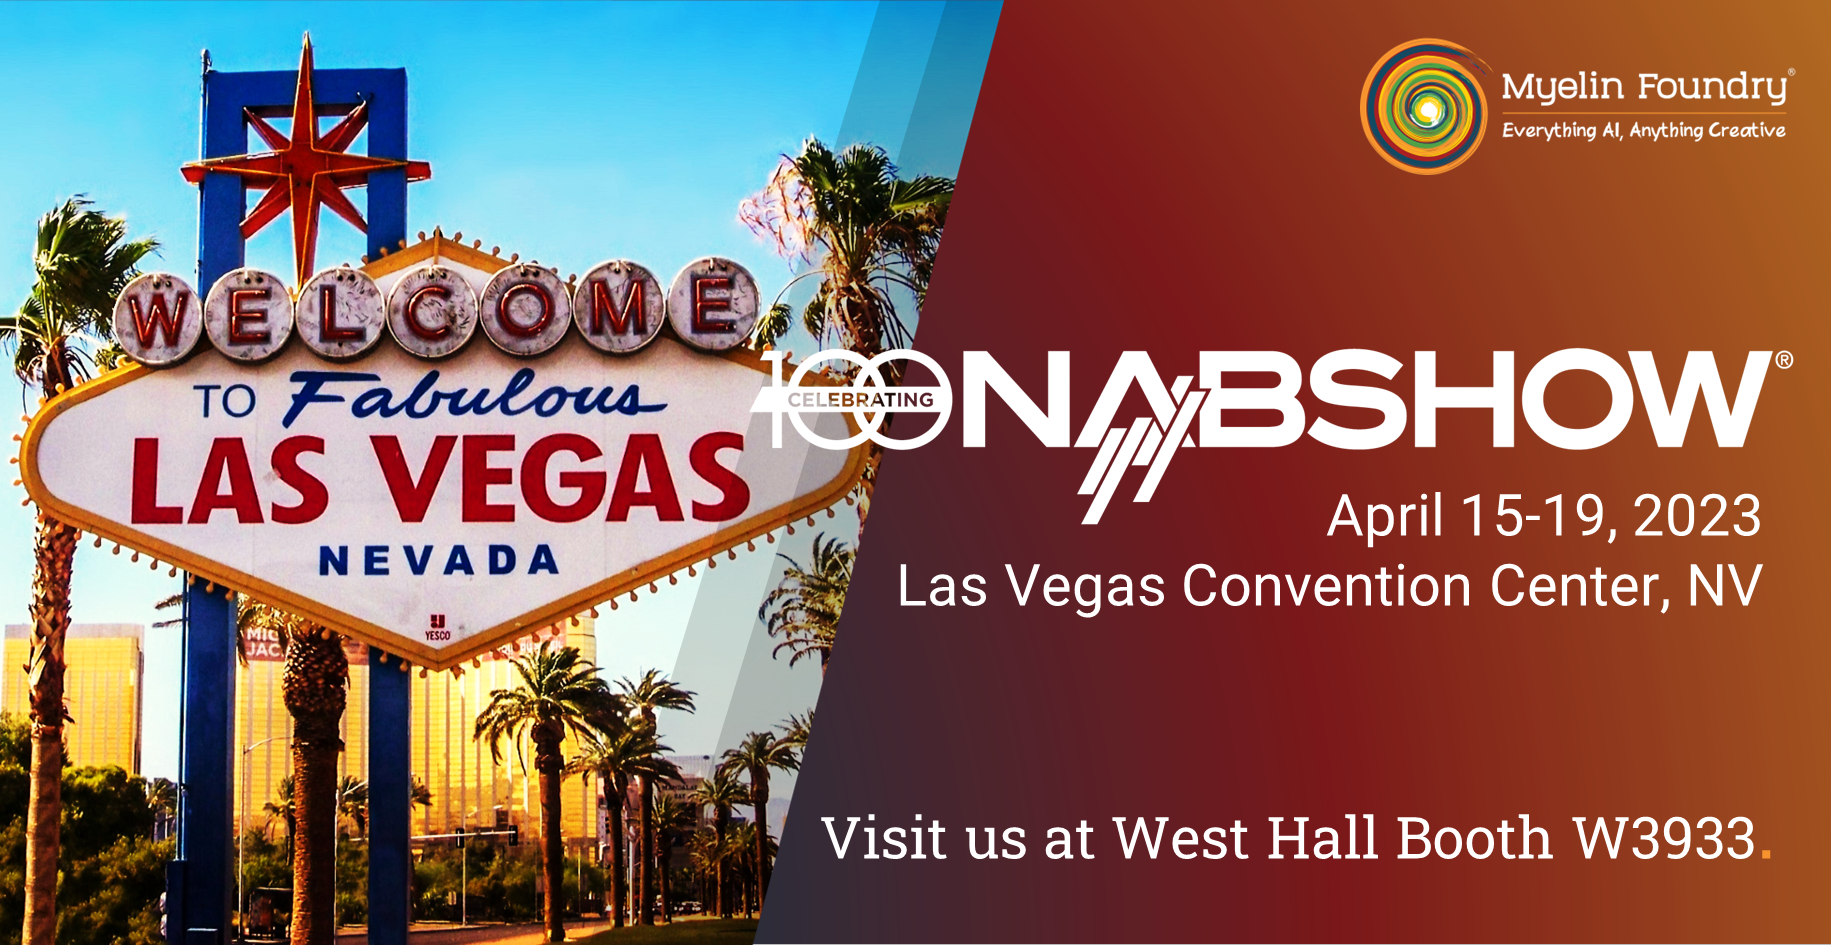 Meet us in Las Vegas at the 2023 NAB Show